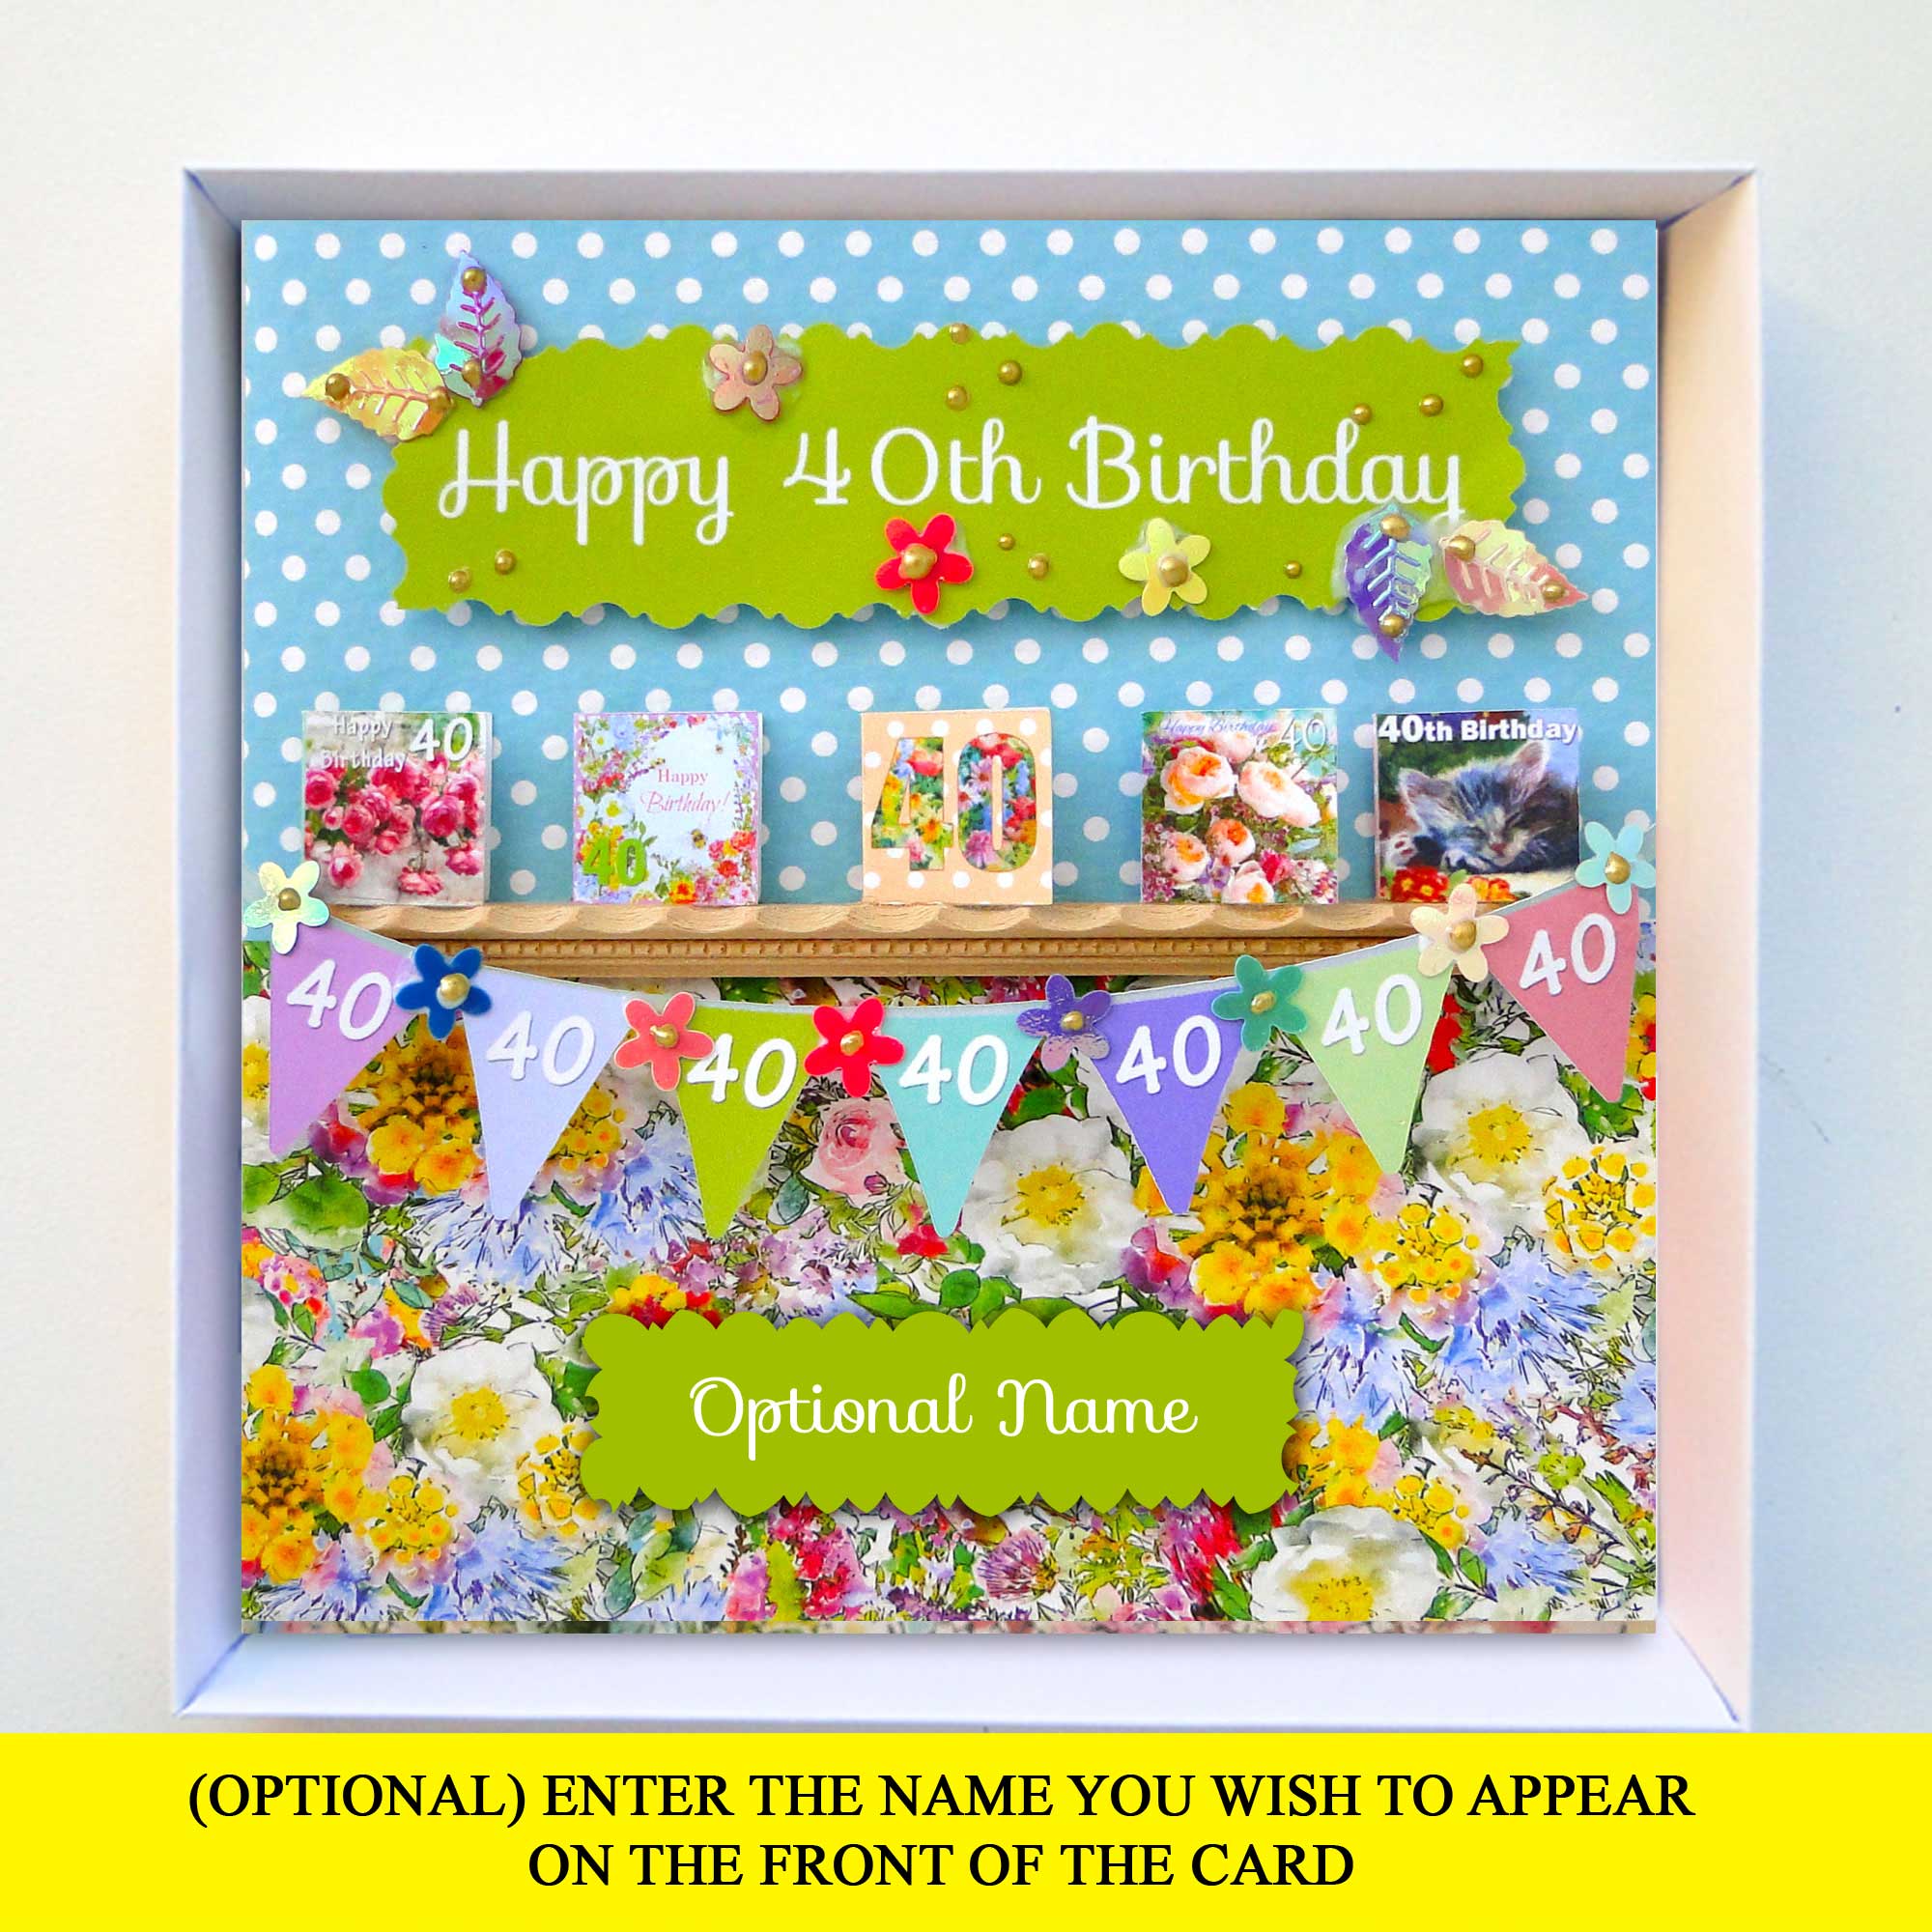 (OPTIONAL) ENTER THE NAME YOU WISH TO APPEAR ON THE FRONT OF THE CARD